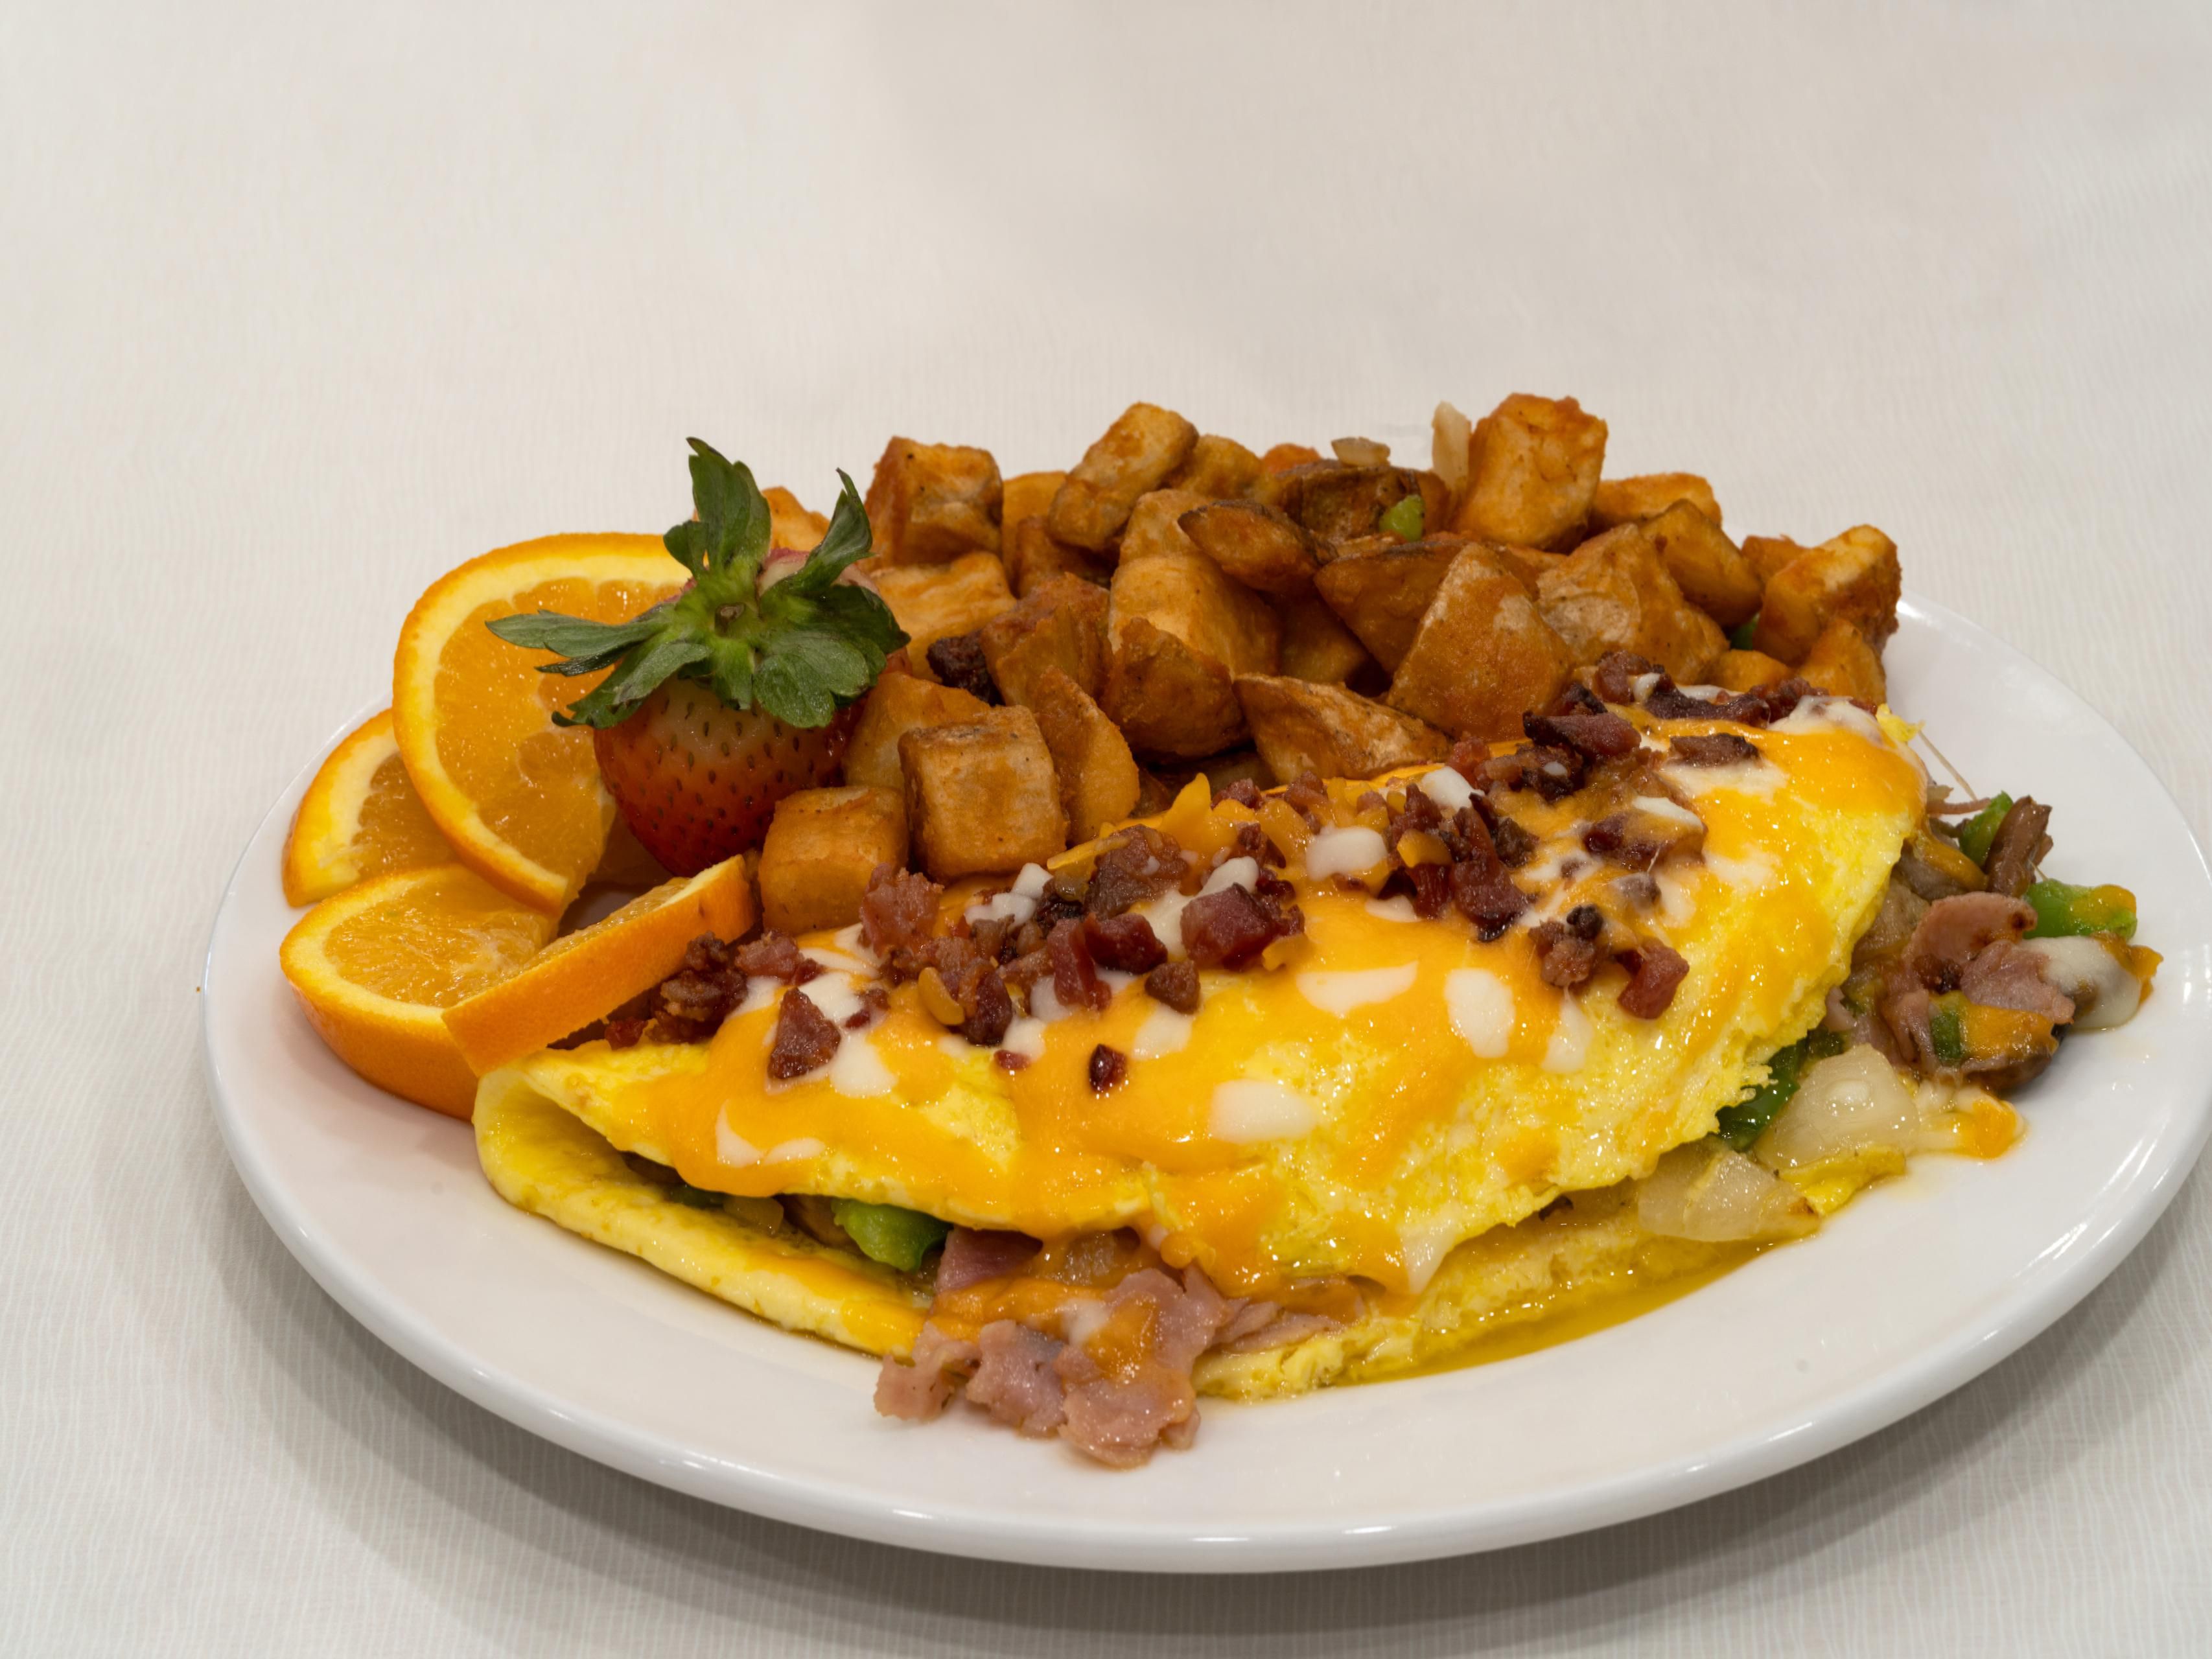 Start the day with our breakfast in 302 Grill served daily from 6:00 AM-10:00 AM. Features a variety of delicious hot and cold items -- sure to please everyone!